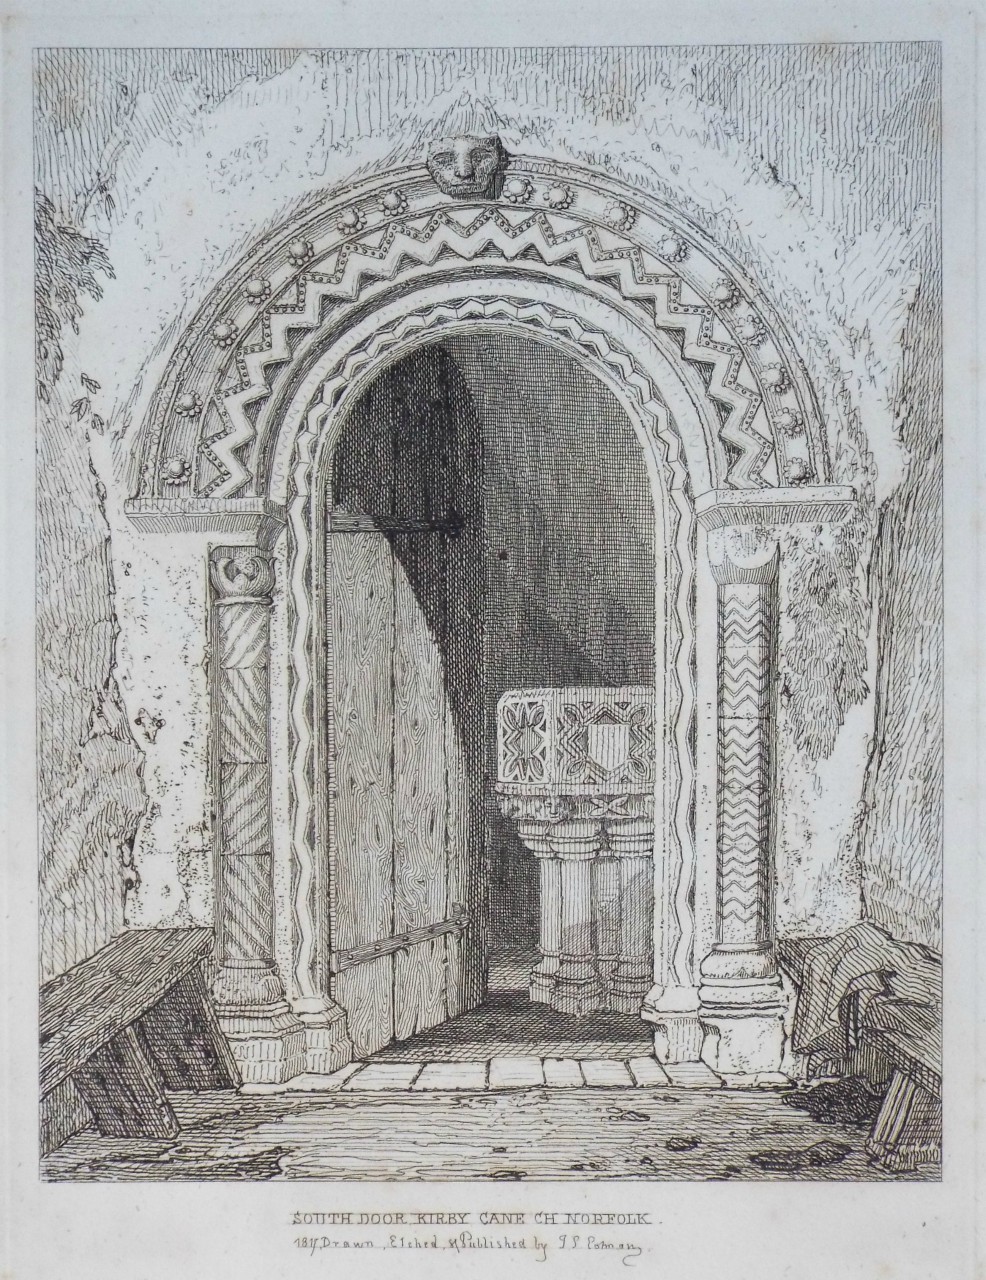 Etching - South Door Kirby Cane Norfolk. - Cotman